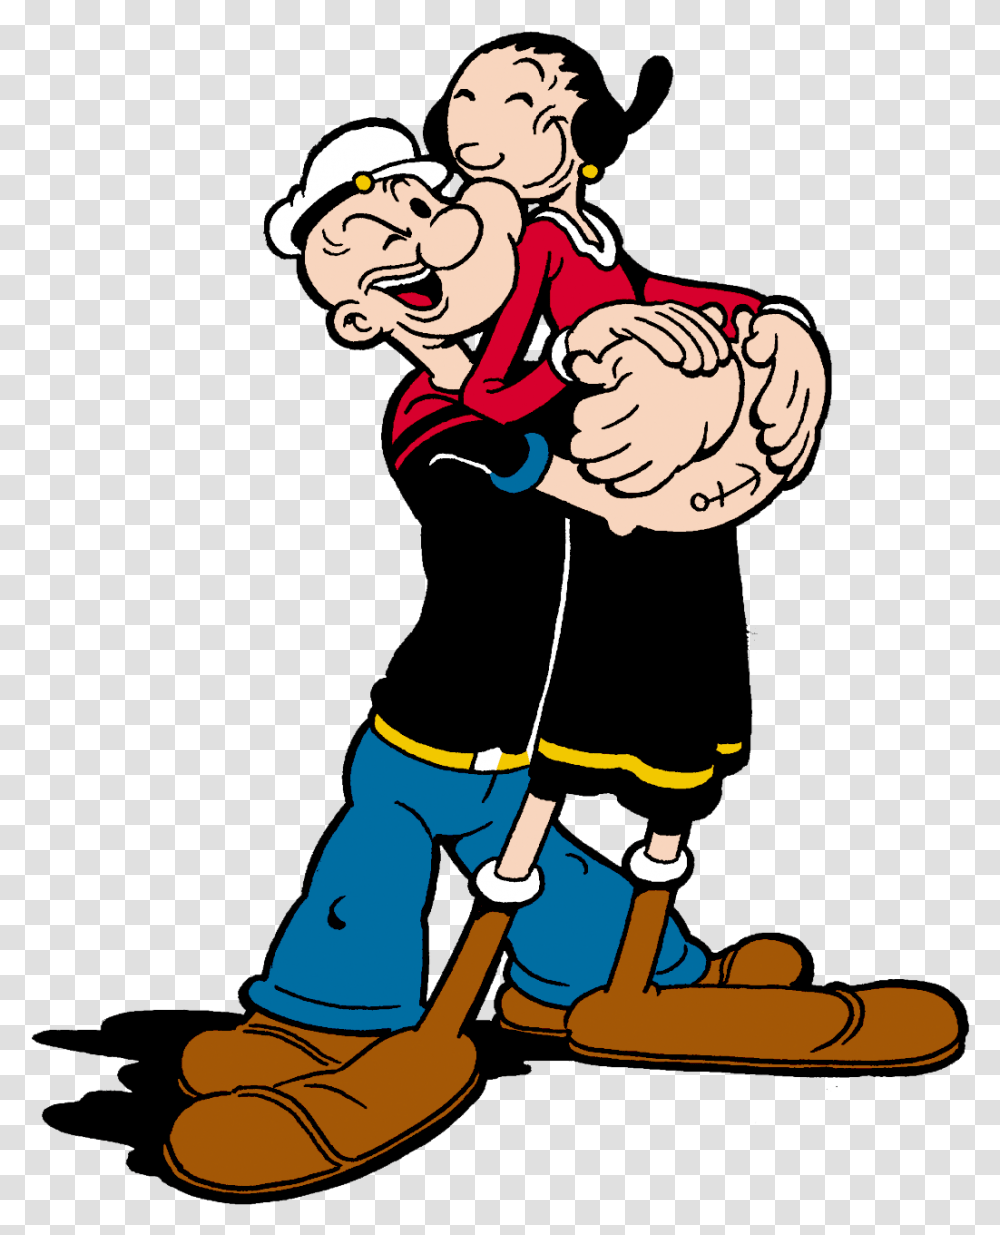 Popeye And Olive Popeye Olive, Person, Human, Fireman, Performer Transparent Png